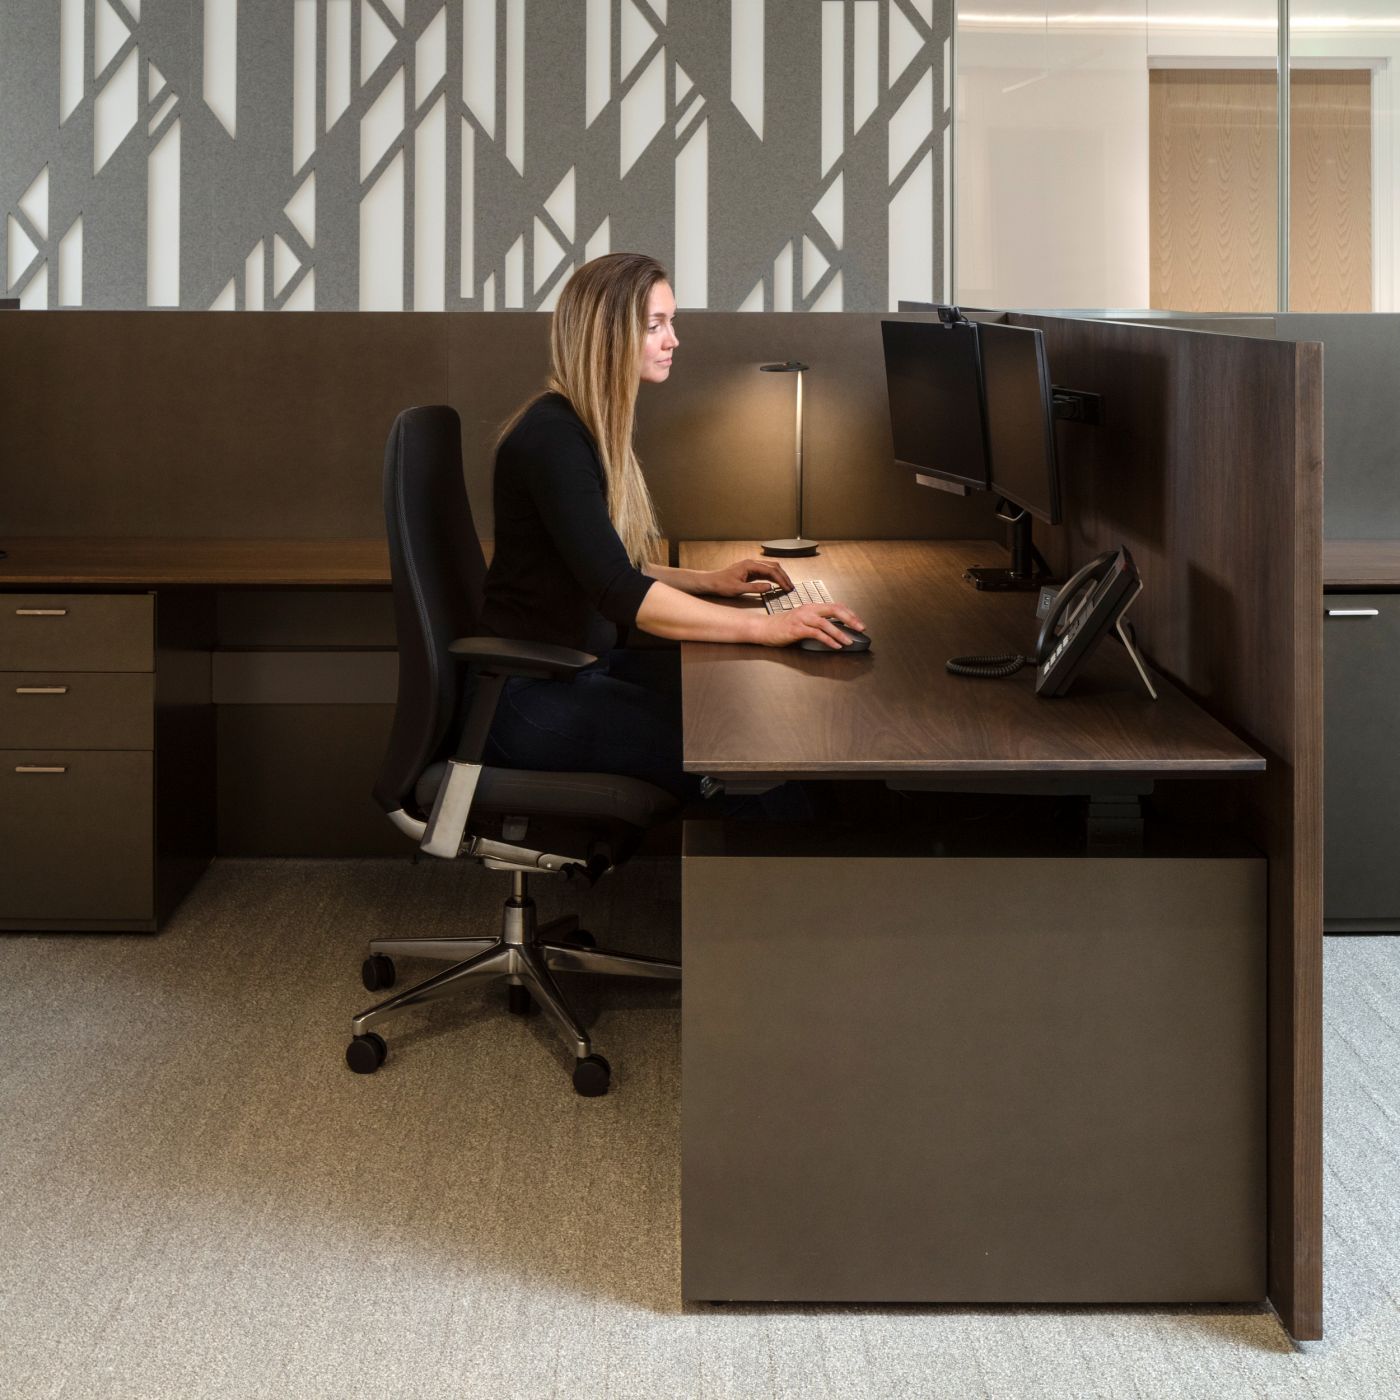 Spacious adjustable-height workstation offers a rich, amenity filled environment.